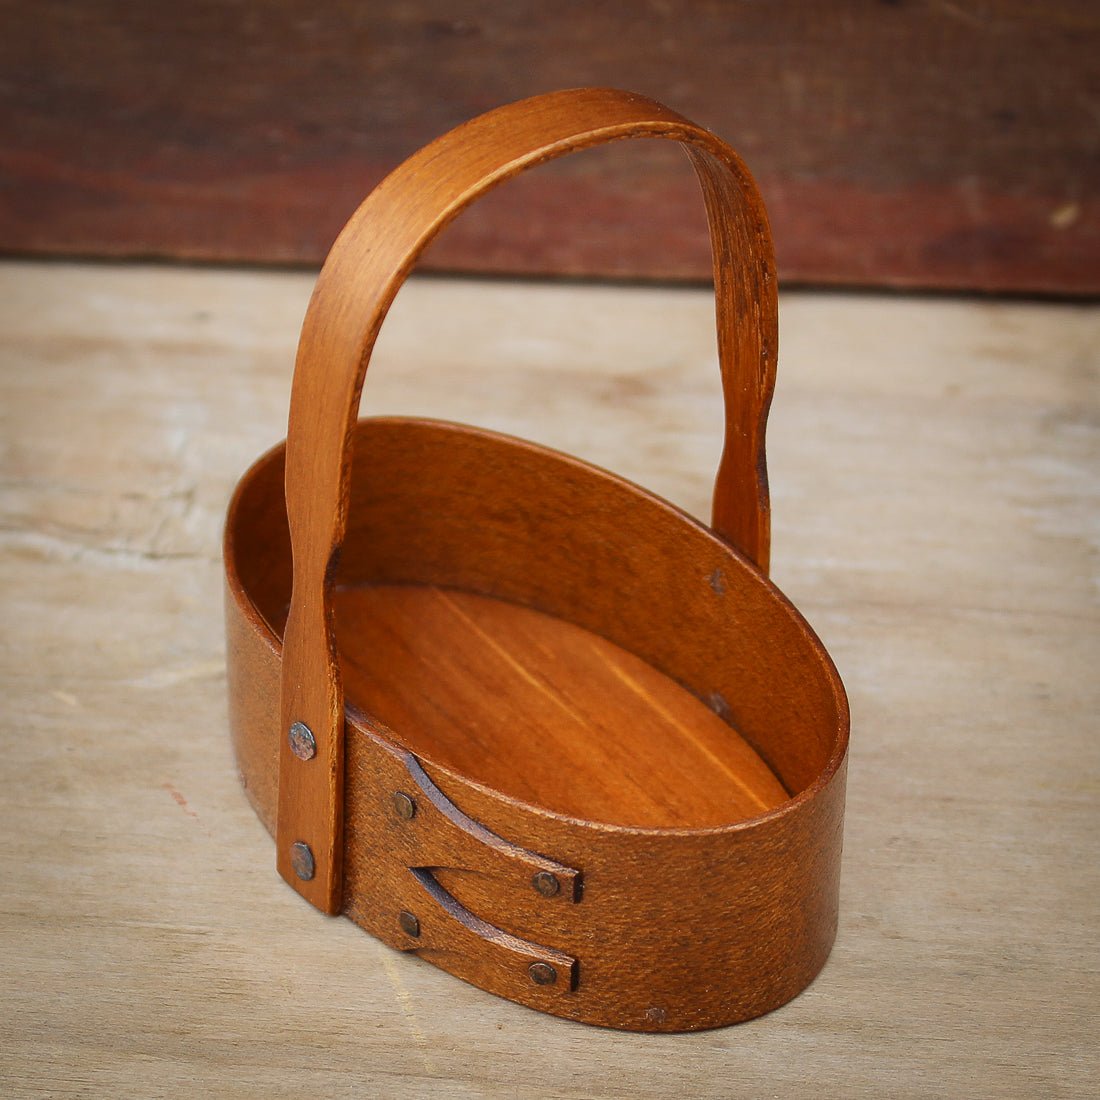 Shaker Carrier, Size #0, LeHays Shaker Boxes, Handcrafted in Maine.  Antiqued Natural Finish, Side View